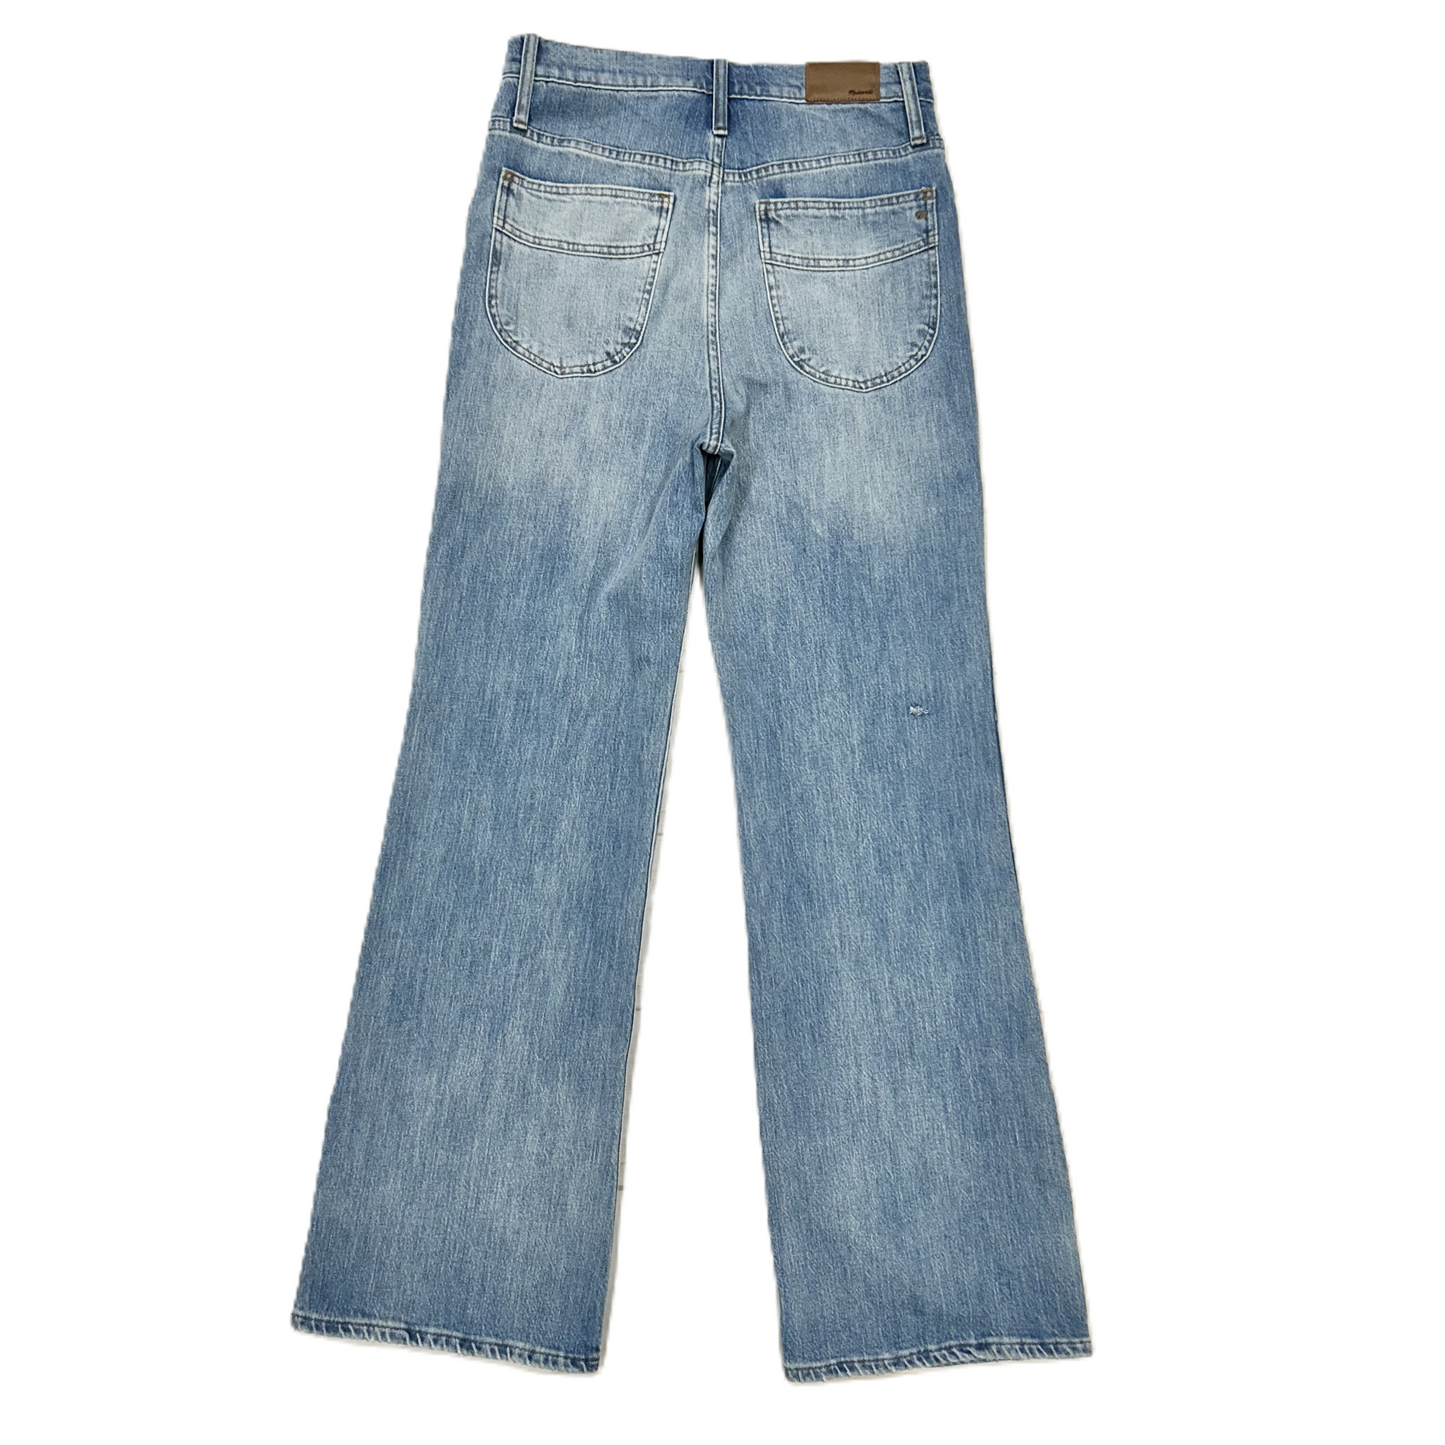 Blue Denim Jeans Flared By Madewell, Size: 10